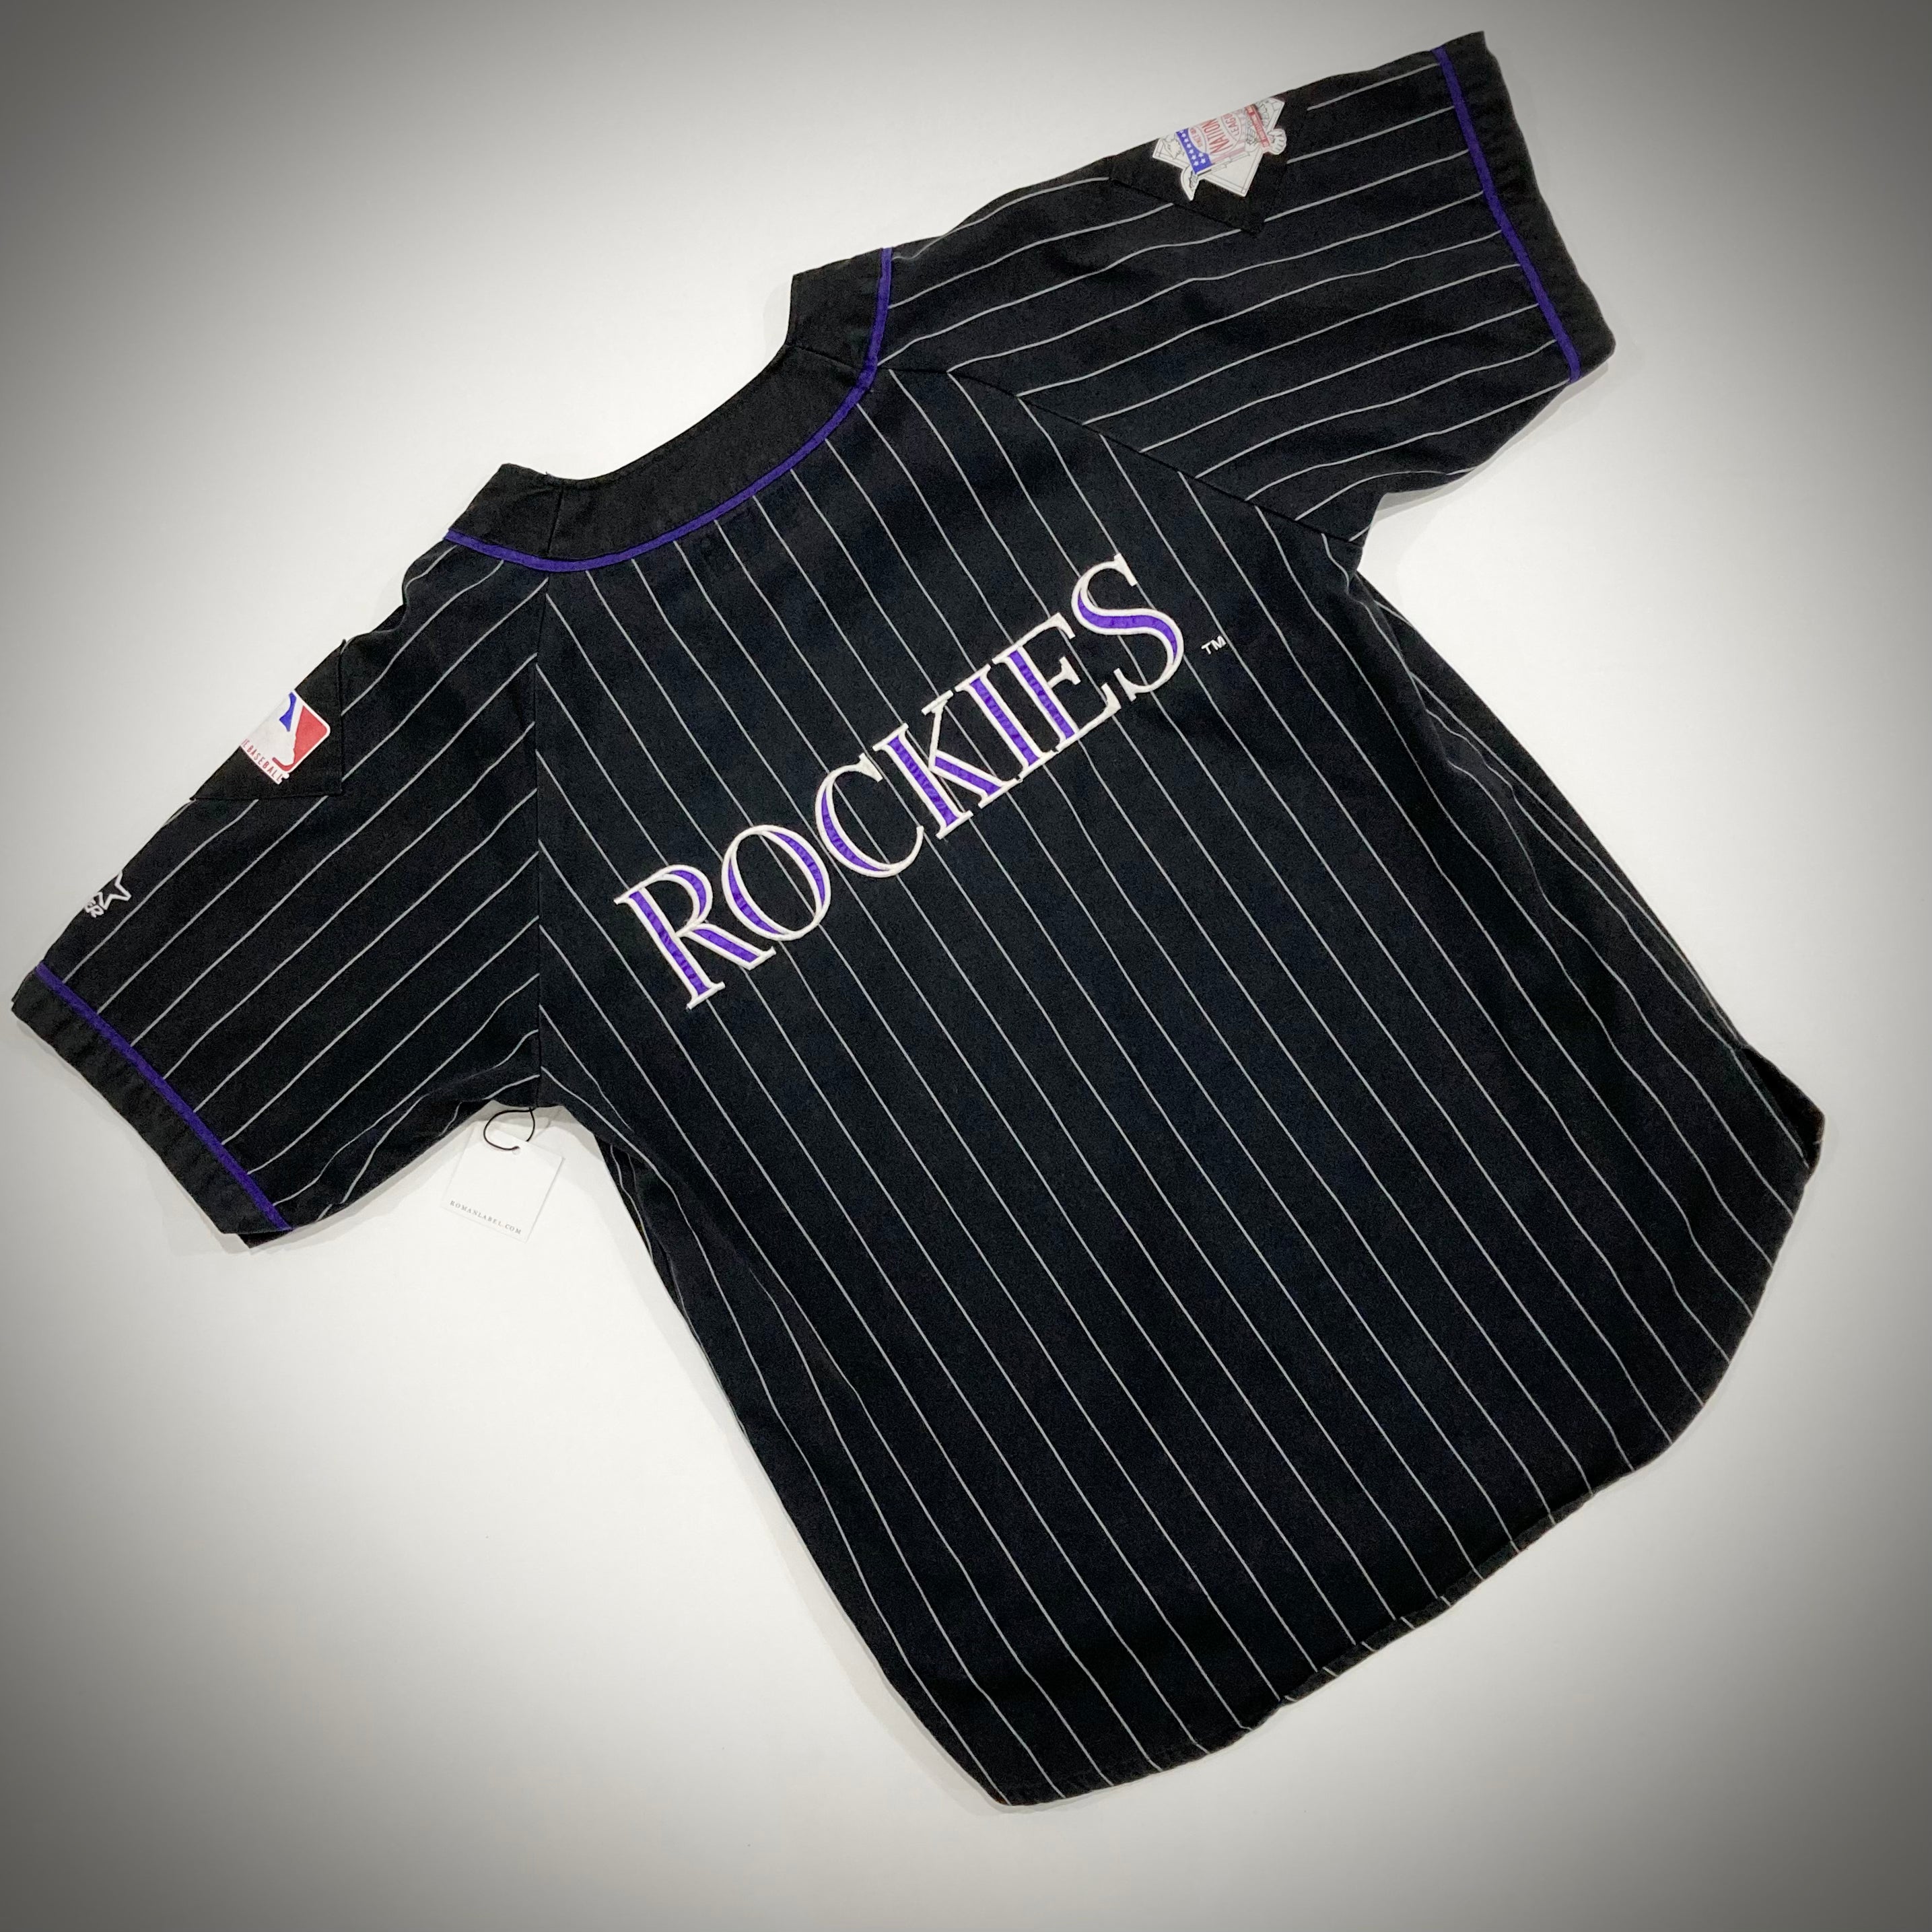 Colorado Rockies: 1995 Russell Athletic White Pinstripe Home Jersey (S –  National Vintage League Ltd.